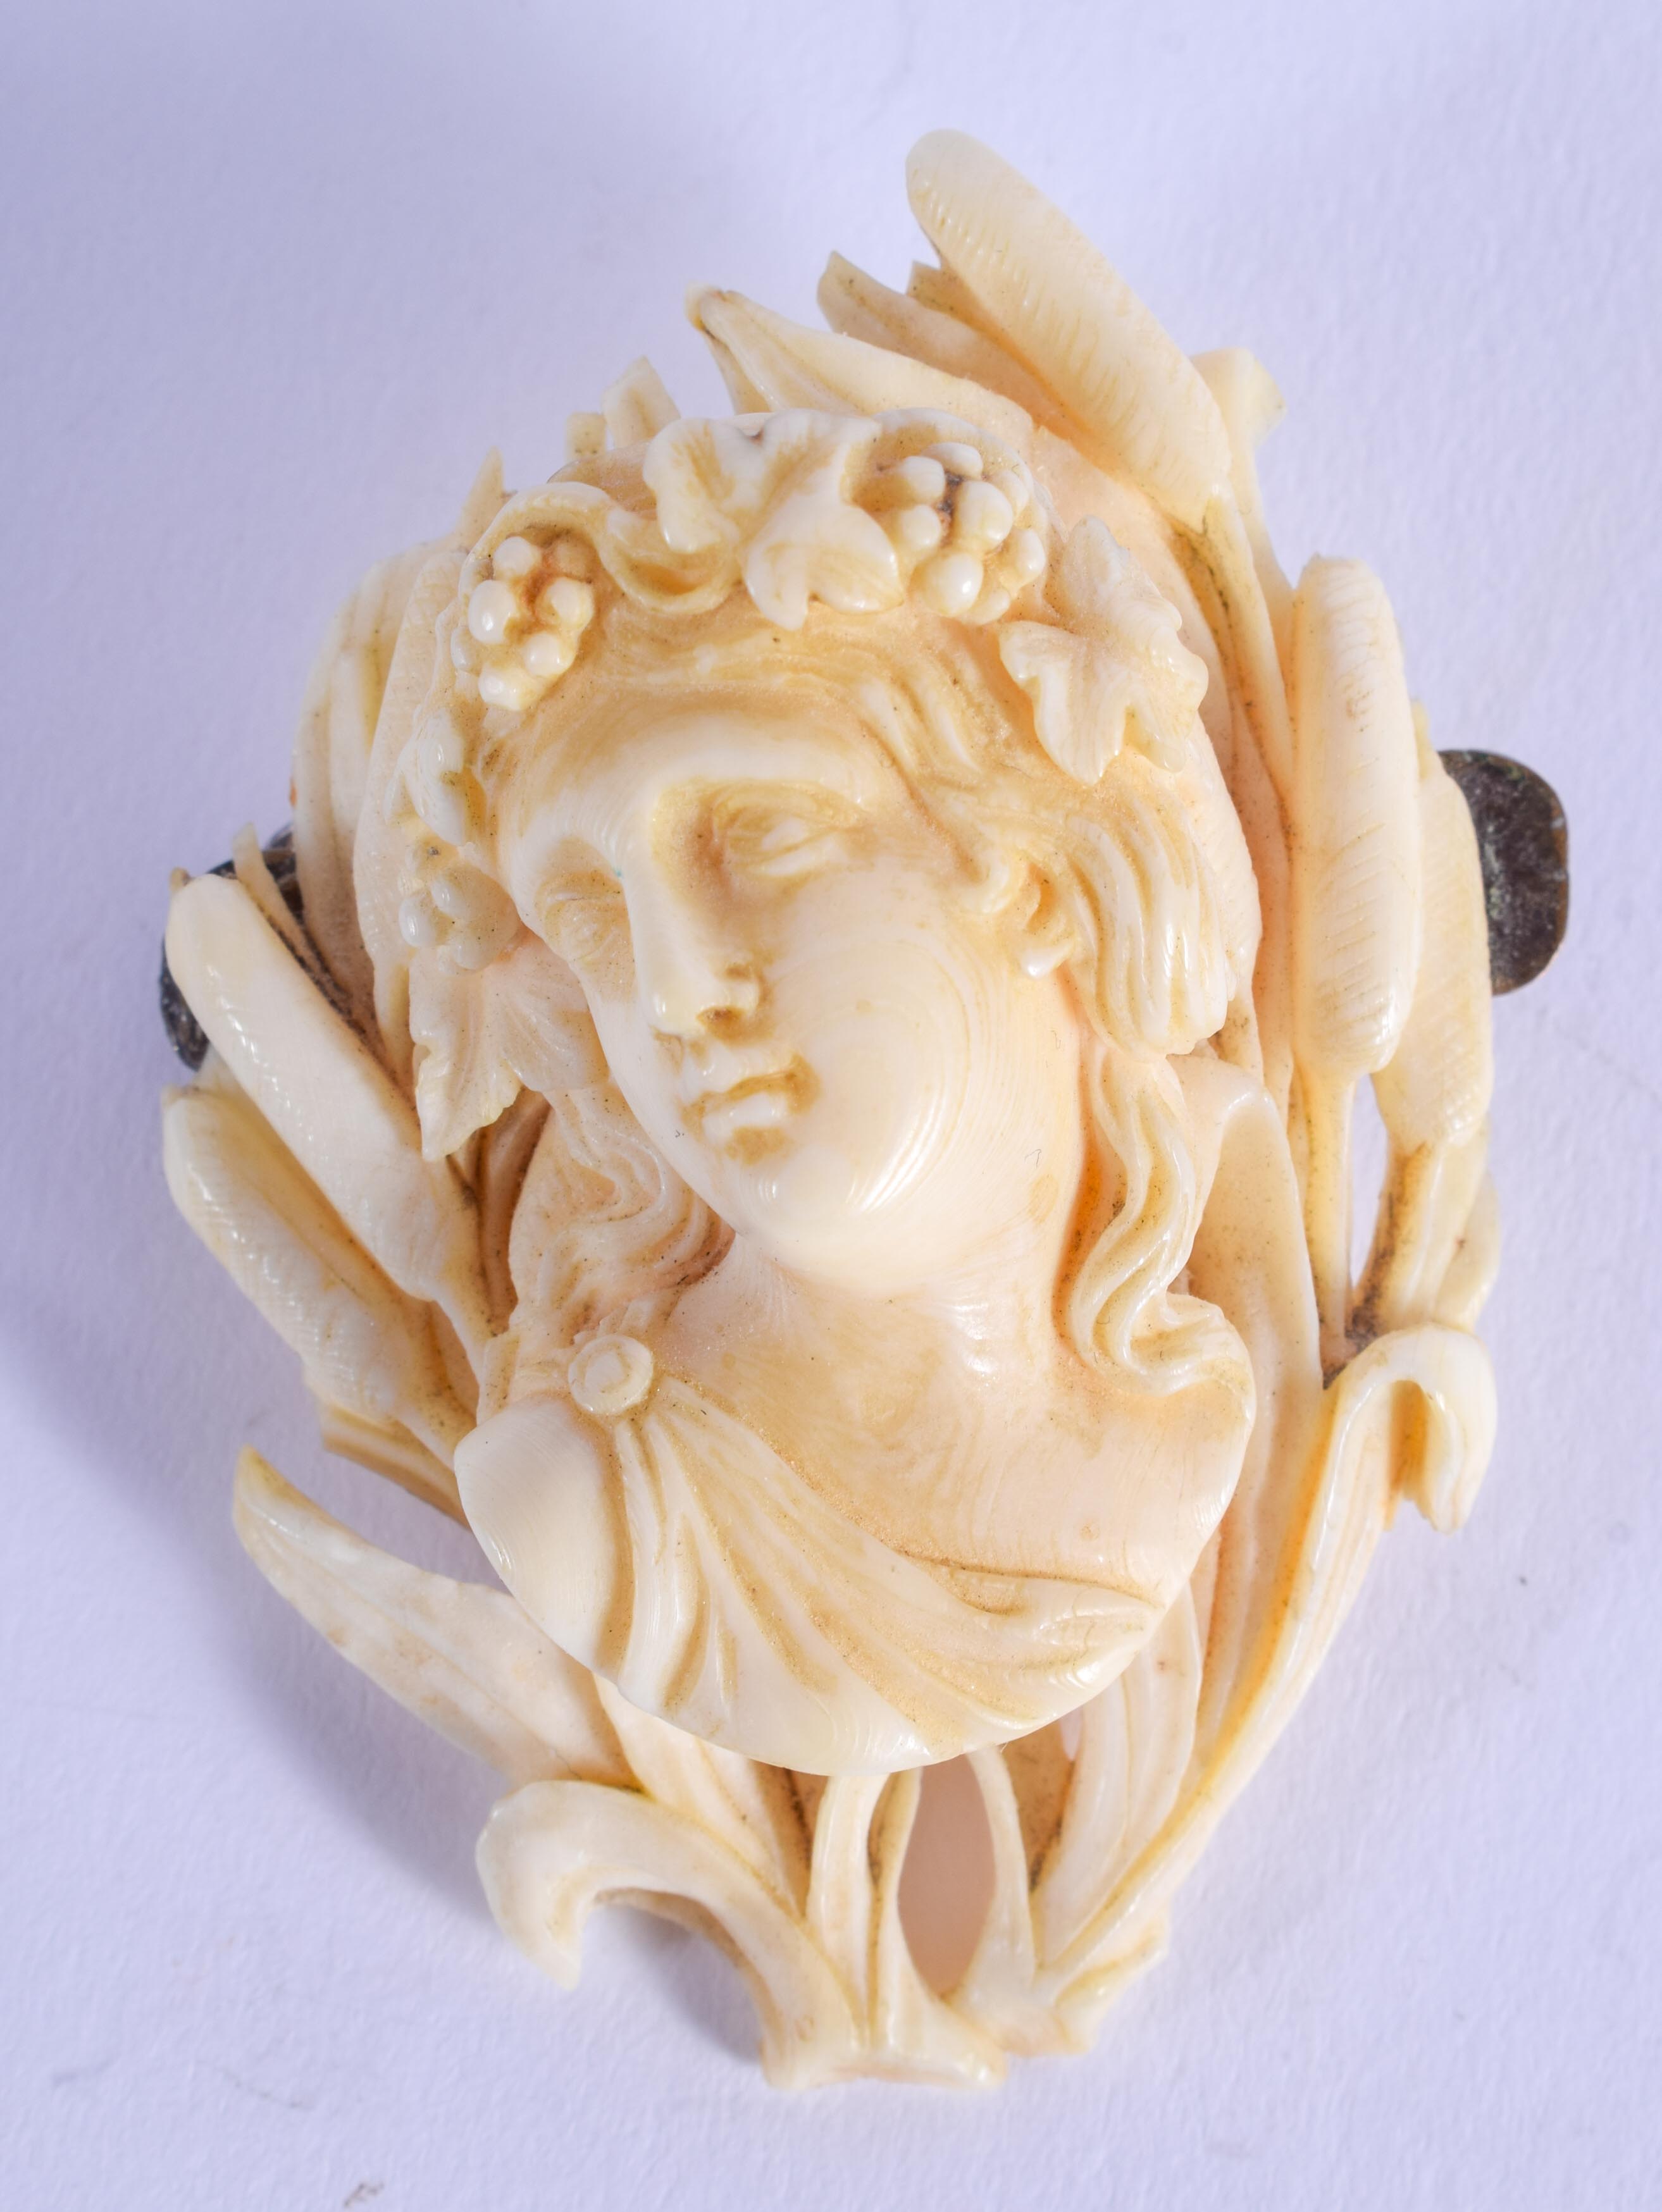 A FINE 19TH CENTURY EUROPEAN CARVED IVORY BROOCH formed as a classical maiden. 4 cm x 5.5 cm.